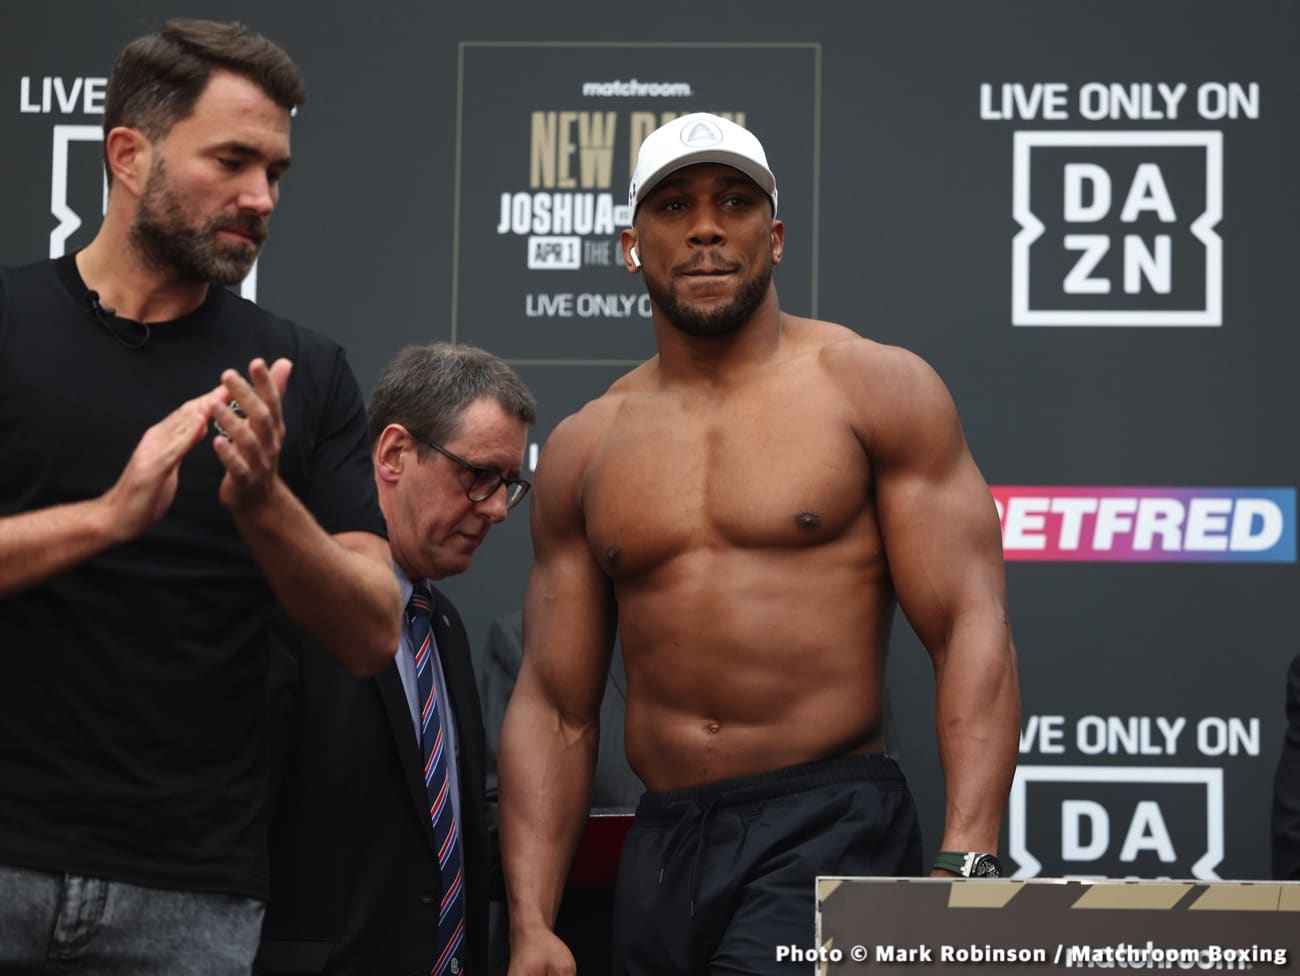 Image: Eddie Hearn to offer Dillian Whyte rematch with Anthony Joshua for July 29th or August 6th in Stadium fight